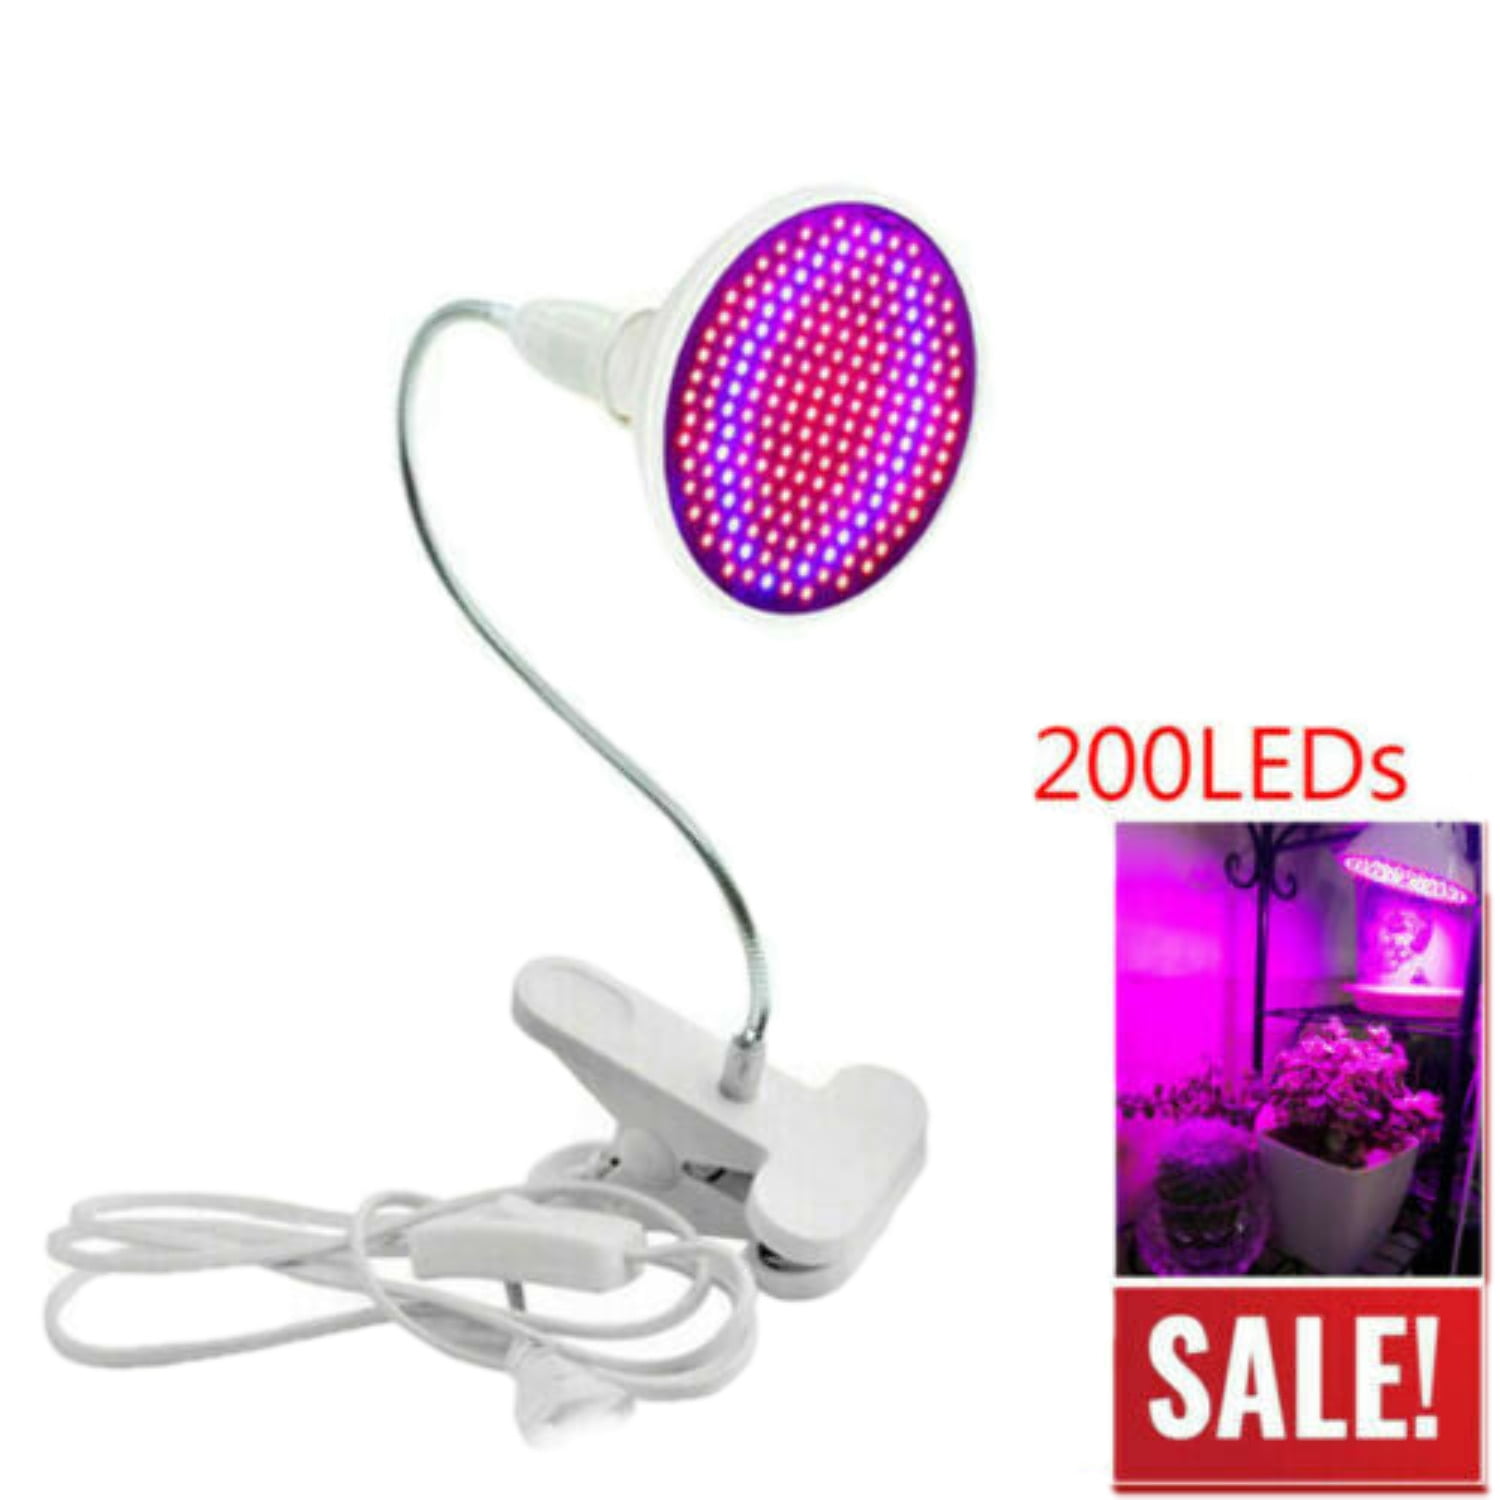 Details about   200 LED Grow Light UV IR Growing Lamp for Indoor Plants Hydroponic Plant USA 